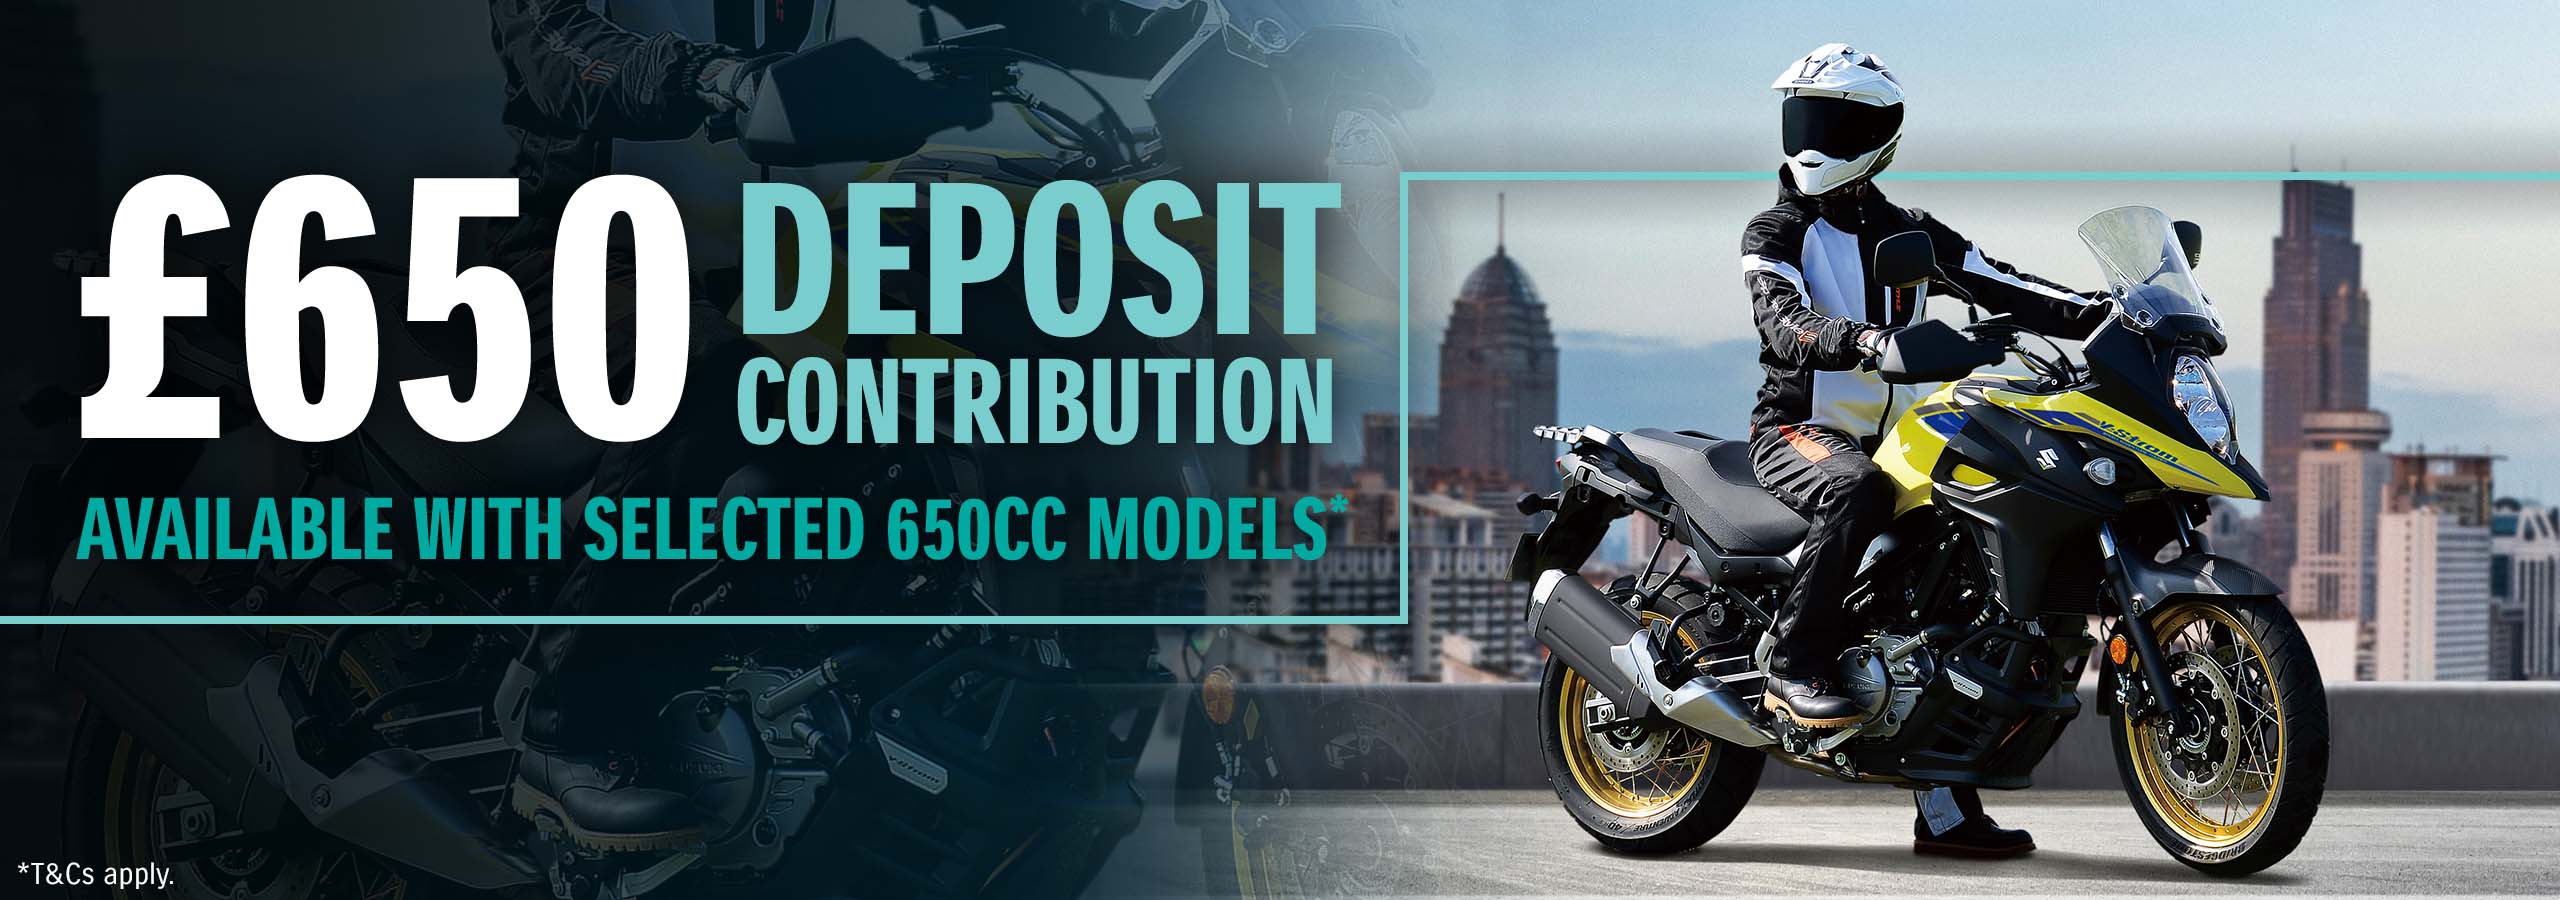 Enjoy a £650 test ride contribution with selected Suzuki models